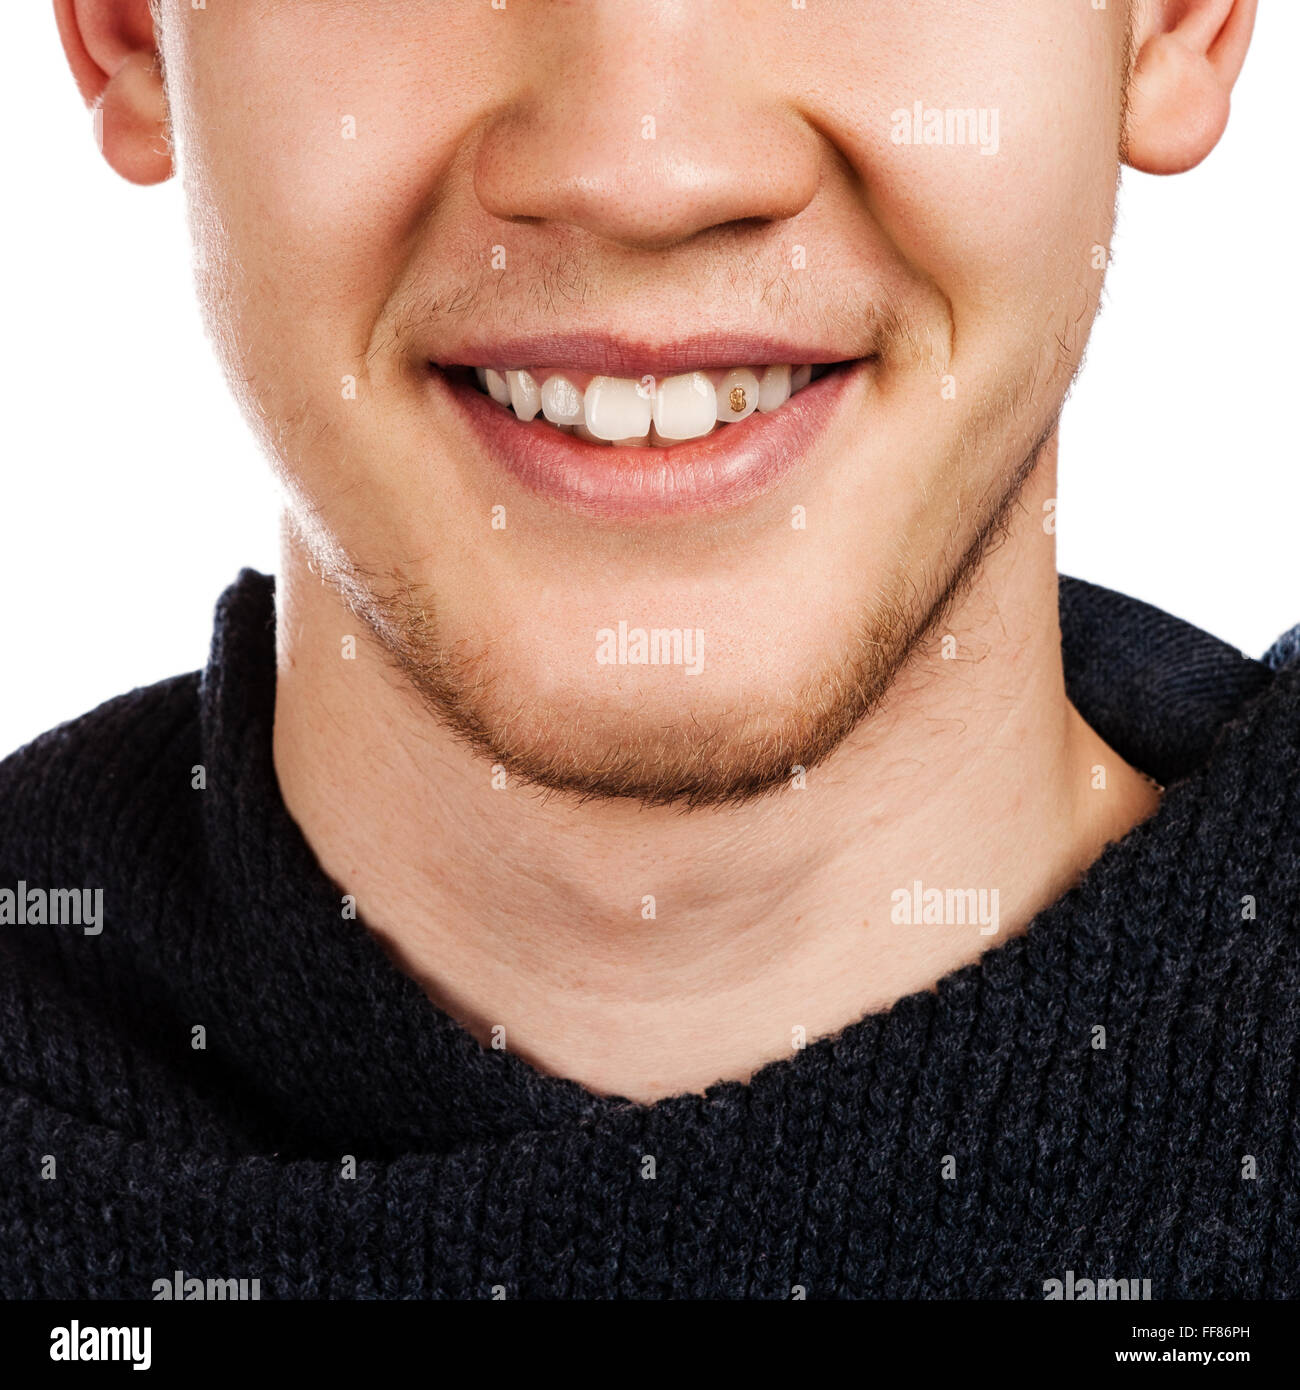 Detailed image of young man smiling with perfect white teeth Stock Photo